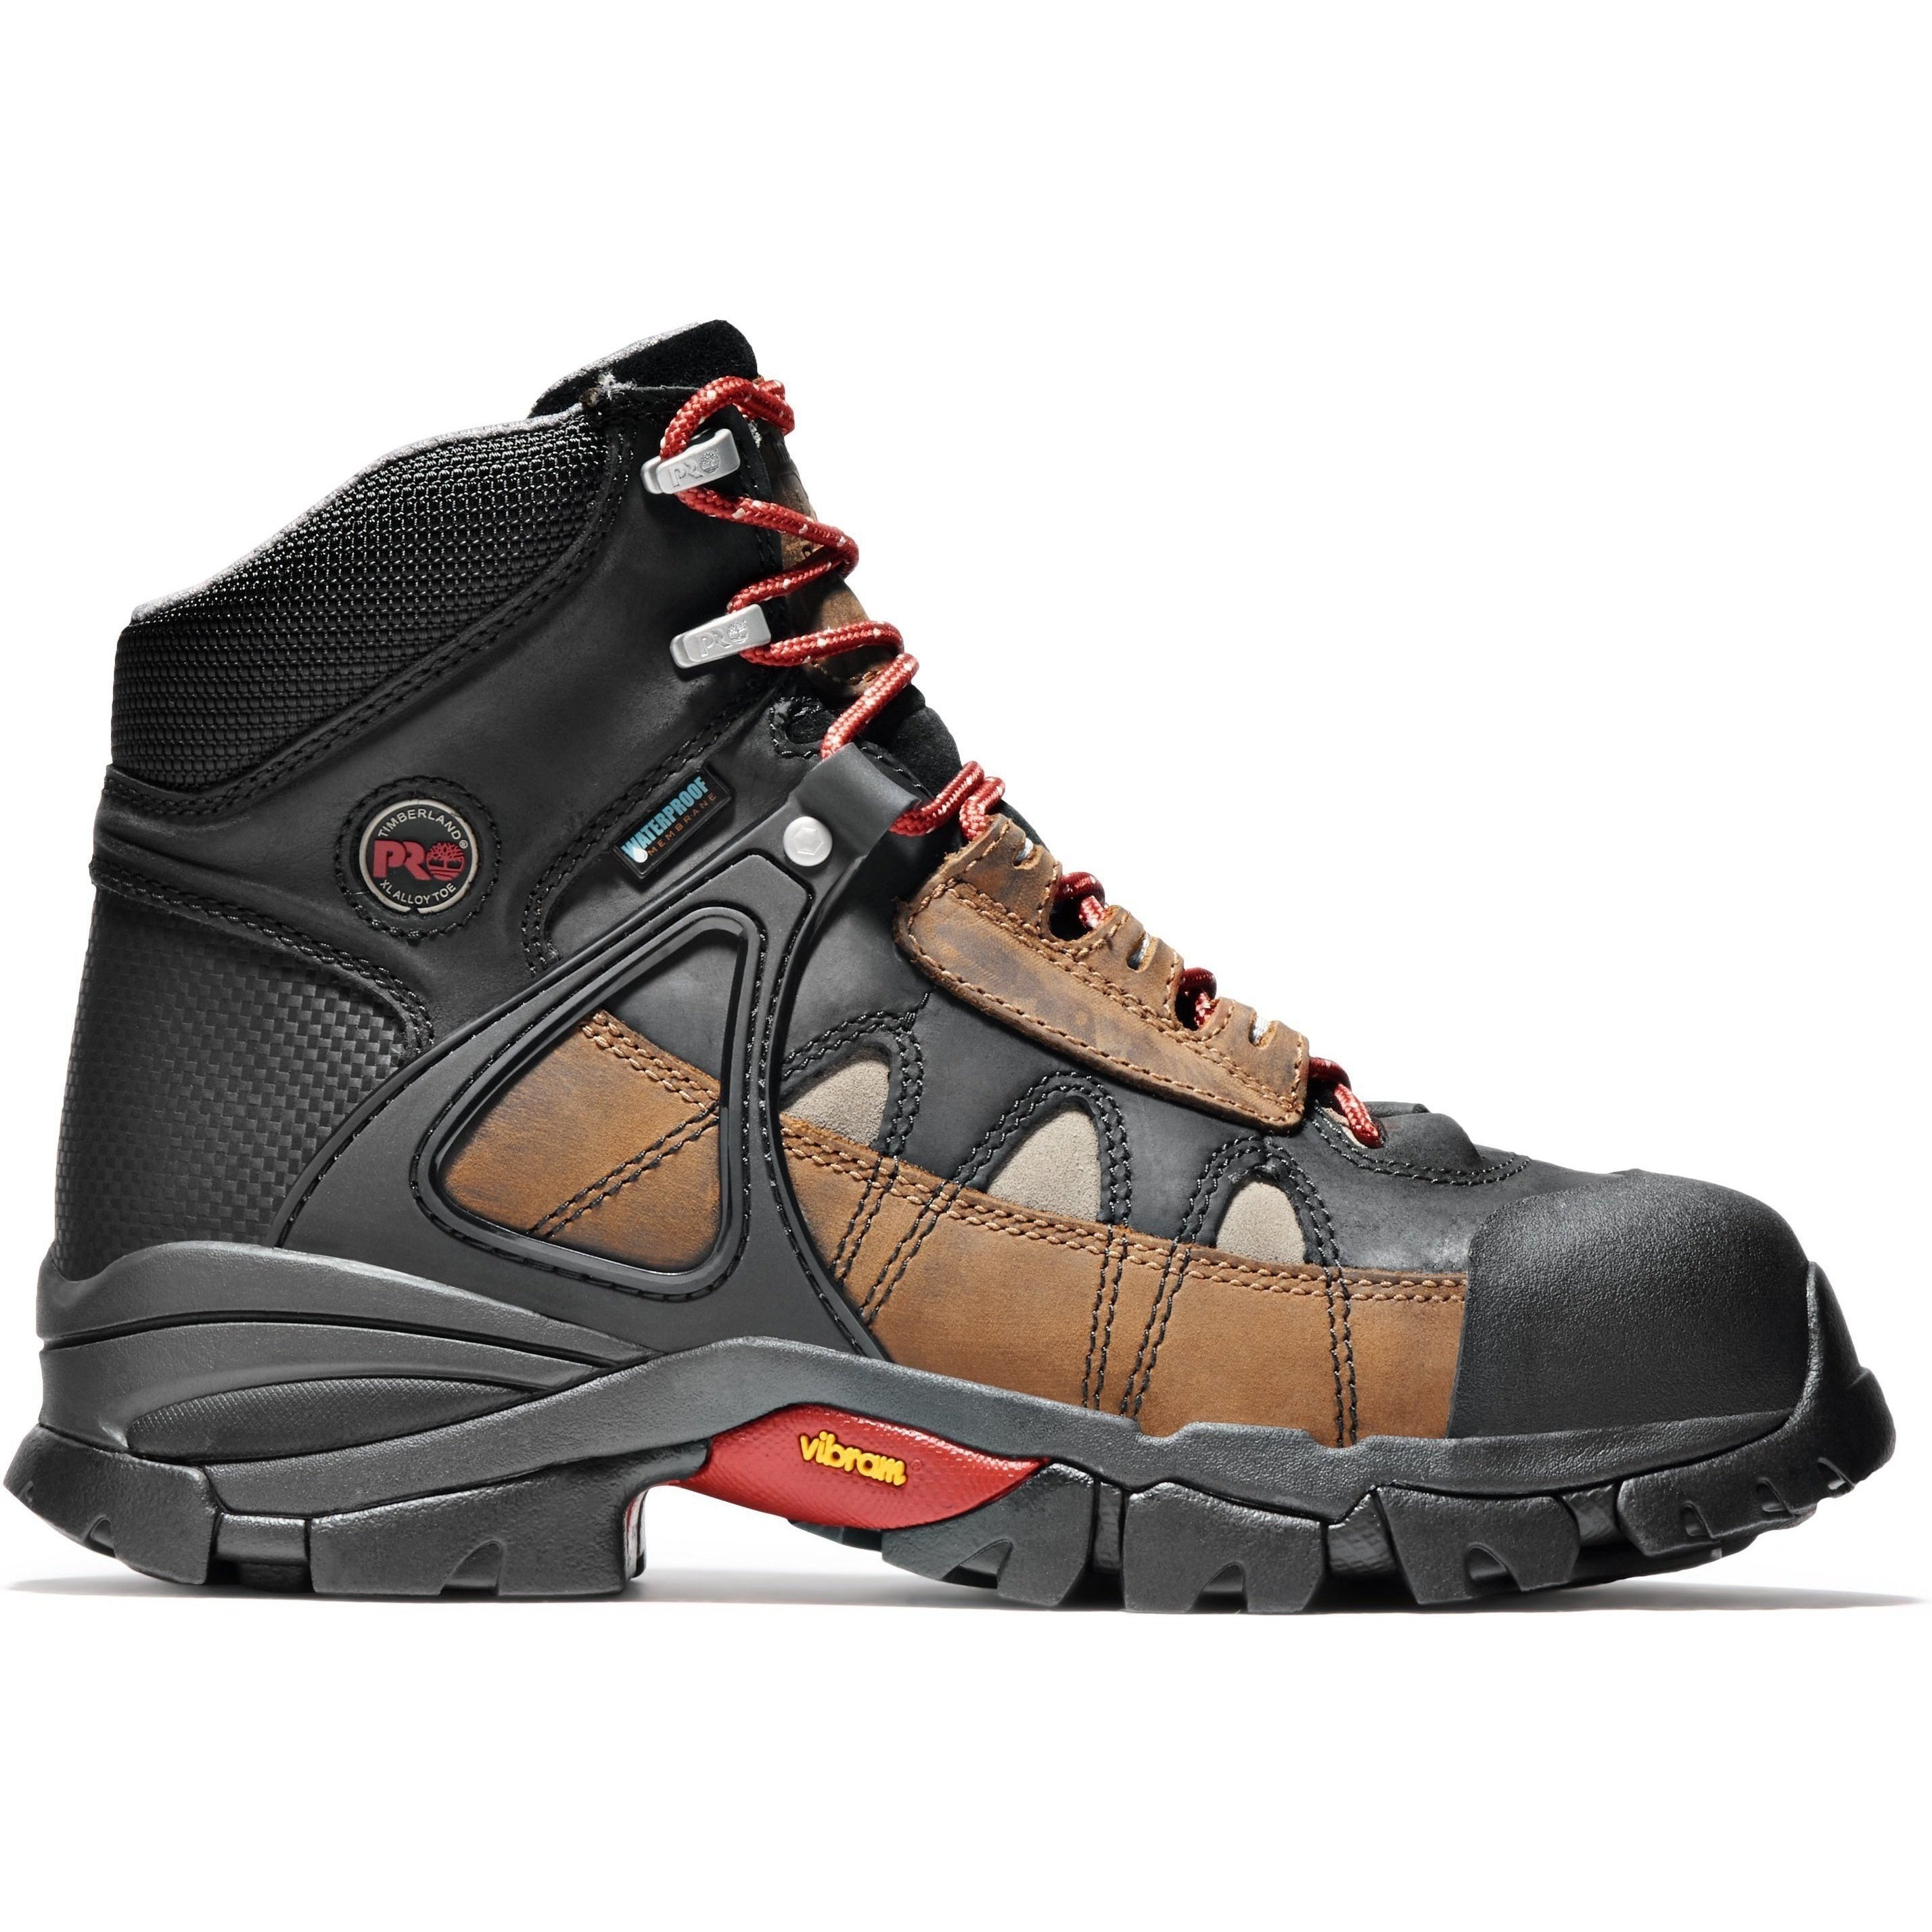 Timberland PRO Men's Hyperion 6